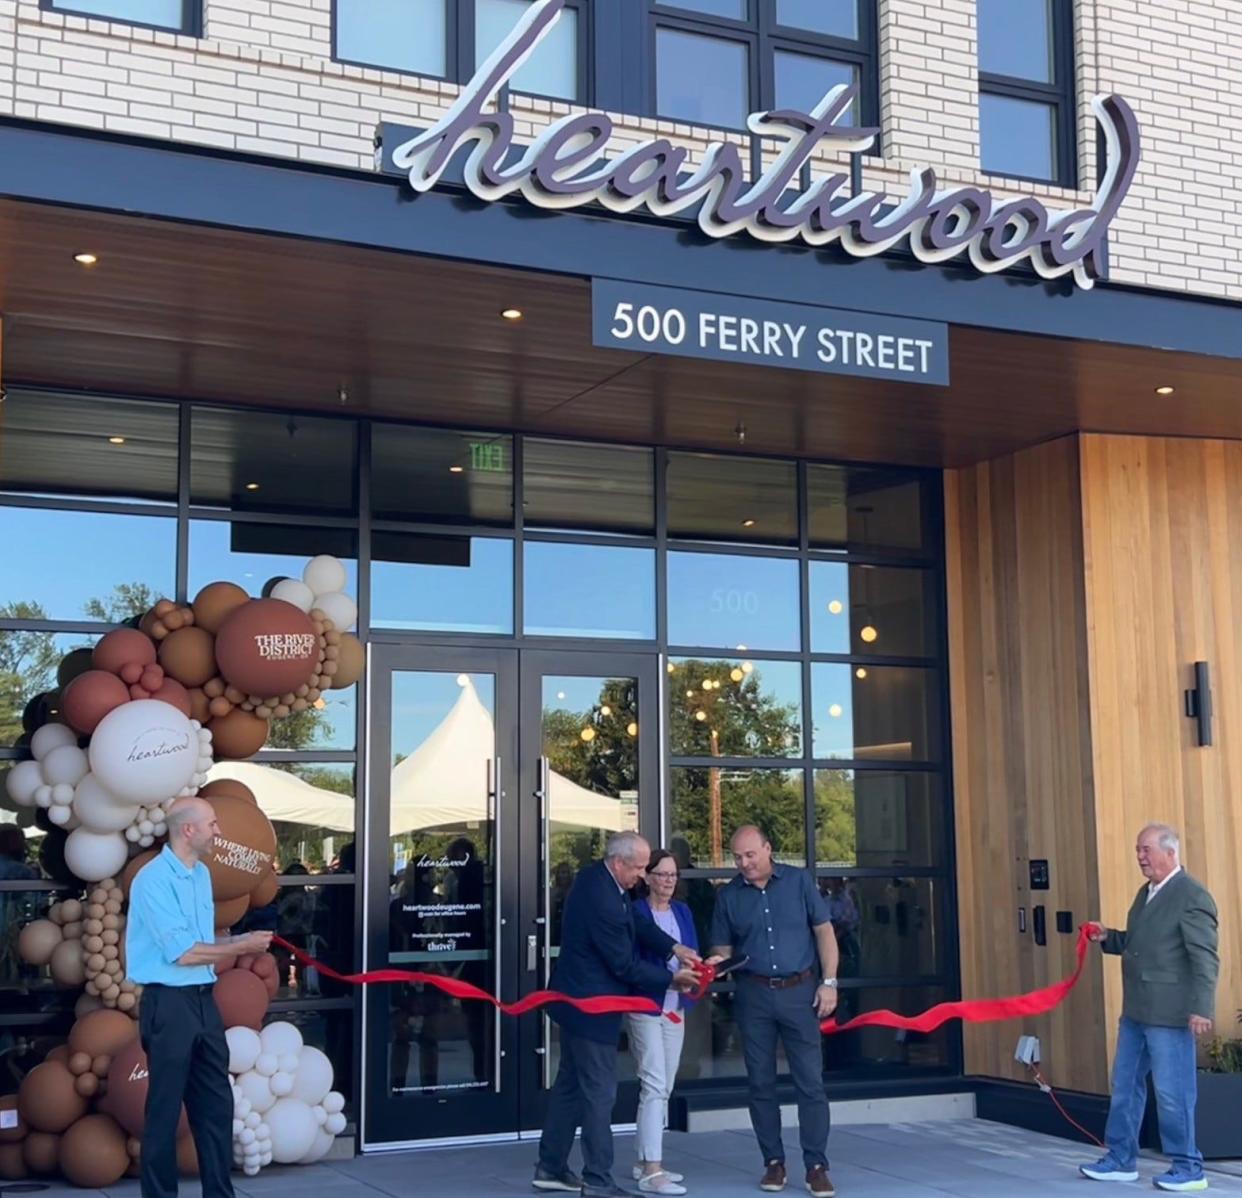 Jim Atkins, co-owner of Atkins Dame, LLC., Mayor Lucy Vinis and Denny Braud, director of the city of Eugene’s Planning and Development department, cut the ribbon for the opening of the Heartwood on June 13. The Heartwood is the River District's first residential building.